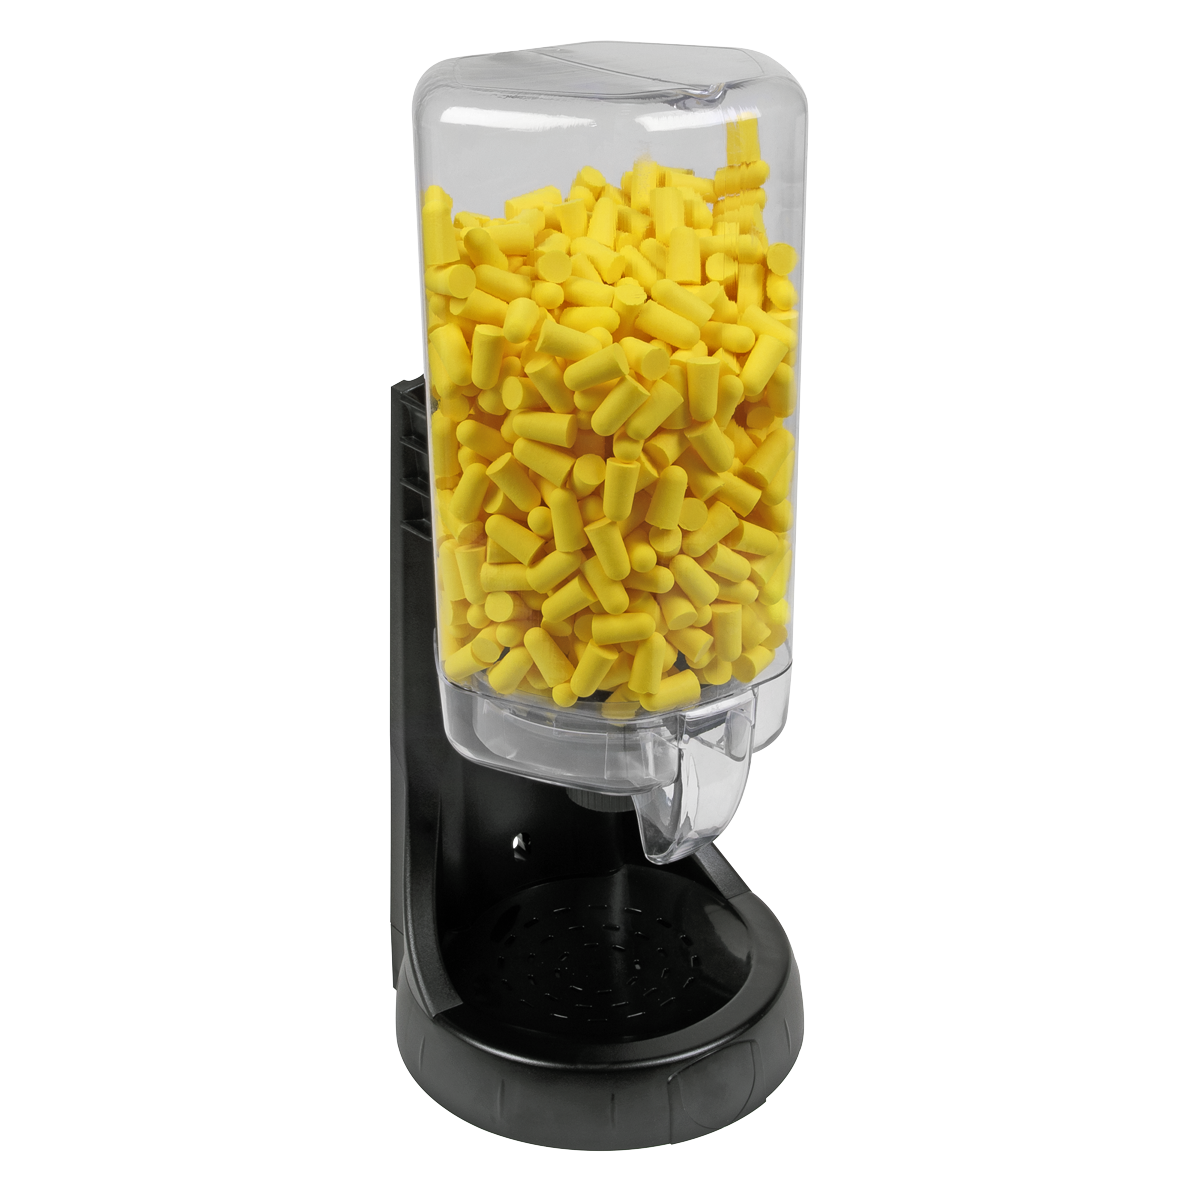 Sealey Disposable Ear Plugs Dispenser - 500 Pairs 403/500D